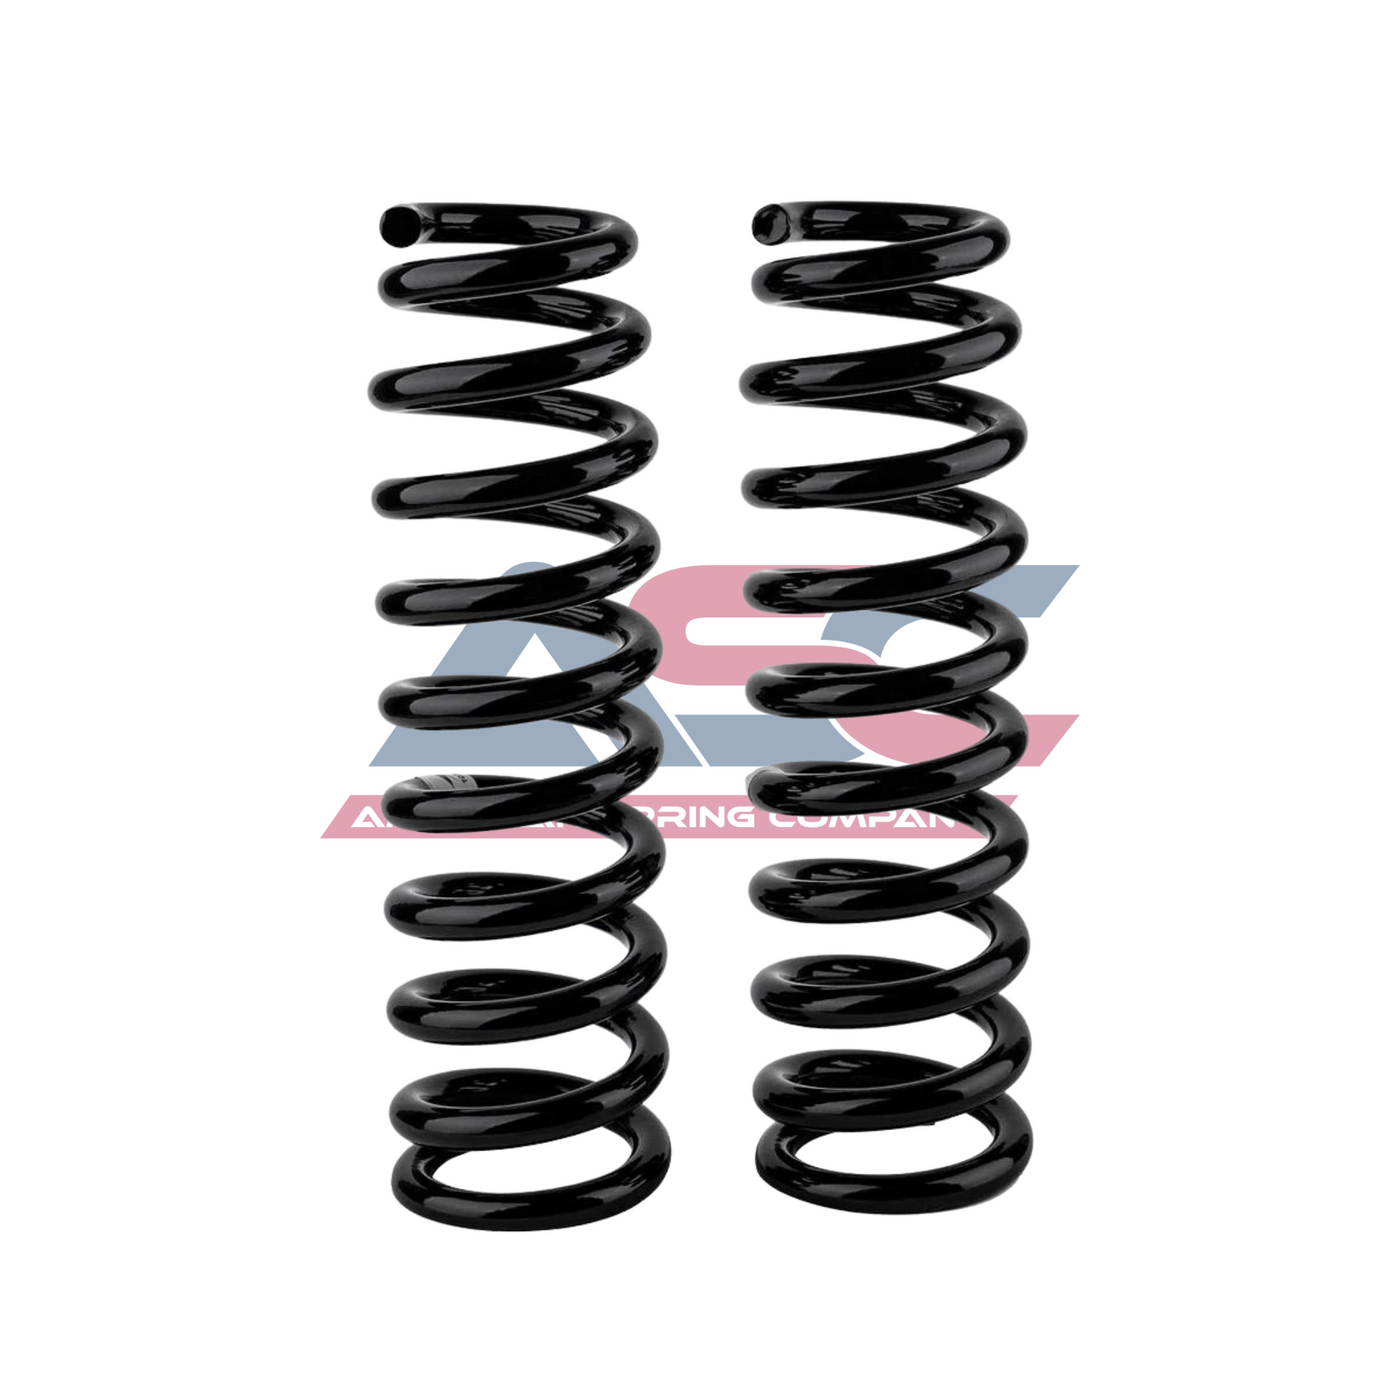 ASC4131 - 98-04 1st Gen Tacoma 3" Lift Front Springs